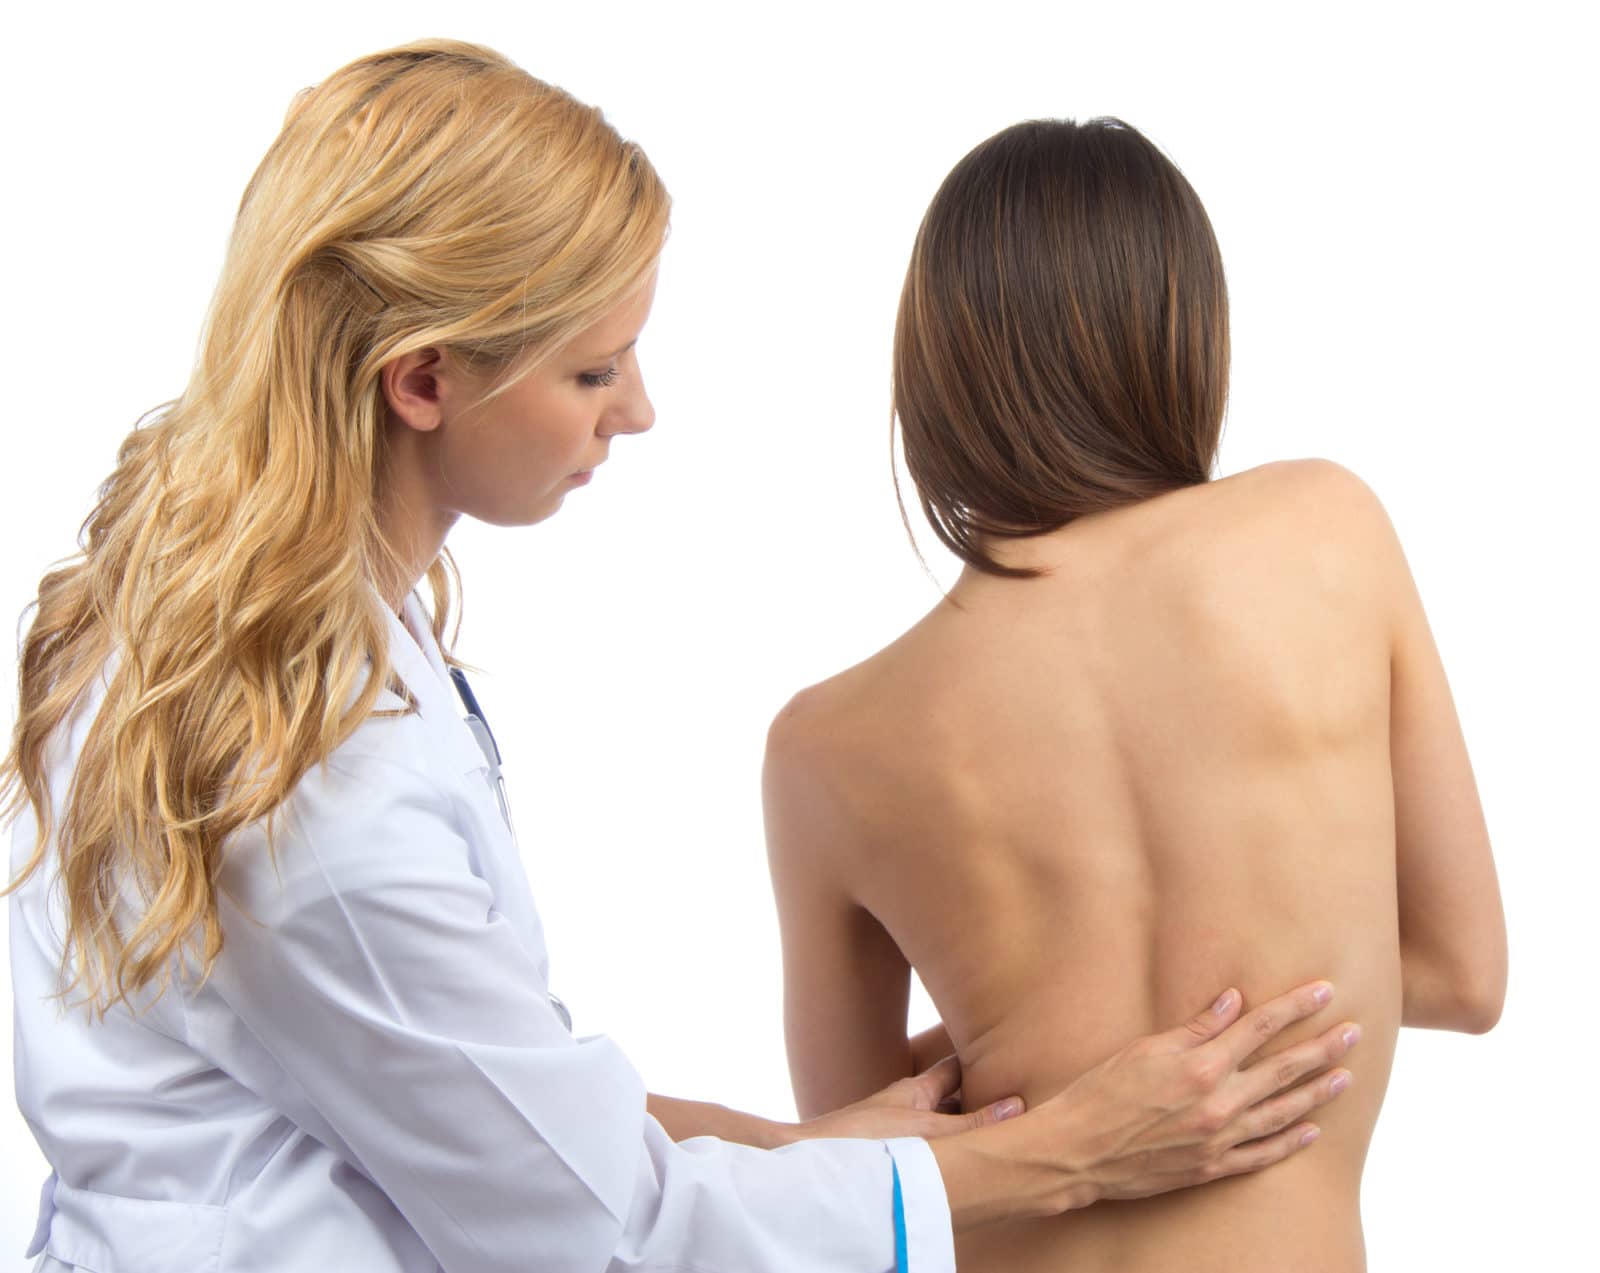 a doctor examining a patient with scoliosis